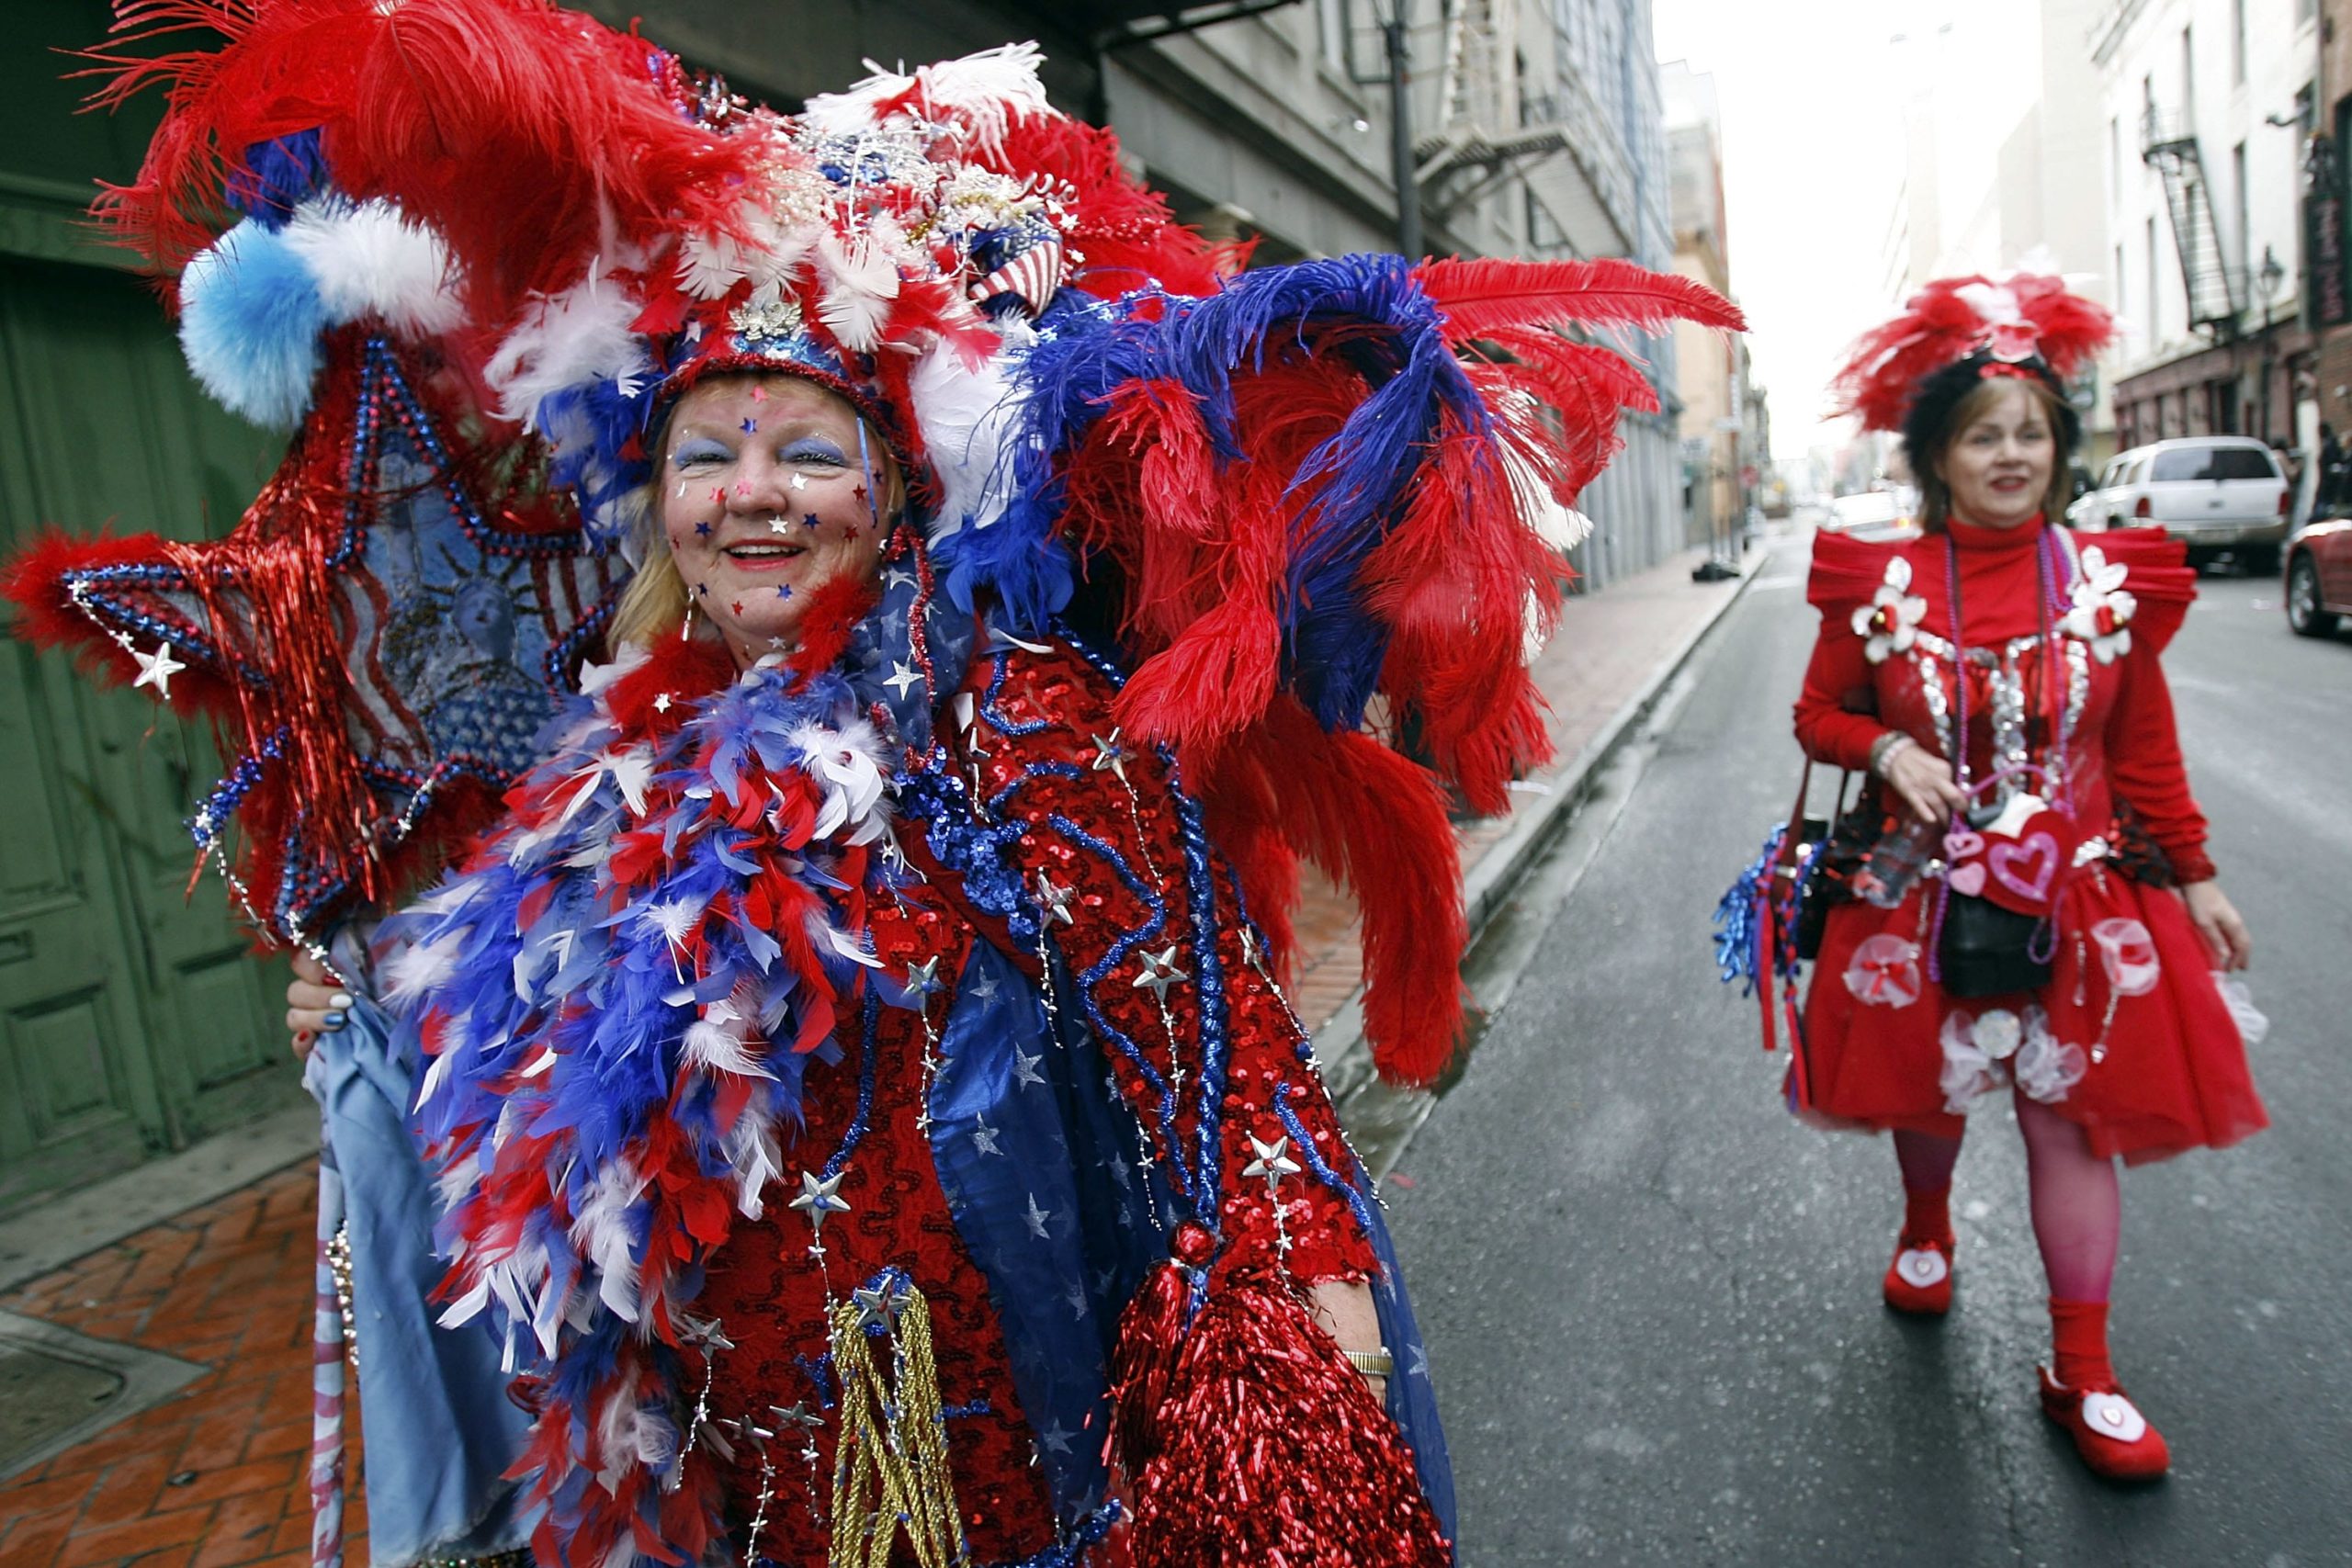 NEW ORLEANS - FEBRUARY 20:  Barbara Rabb (L) of Mississipi, dressed as the Fourth of July, walks through the French Quarter on Mardi Gras Day, February 20, 2007 in New Orleans, Louisiana. This is the second Mardi Gras celebration since Hurricane Katrina devasted the Gulf Coast region.  (Photo by Chris Graythen/Getty Images)